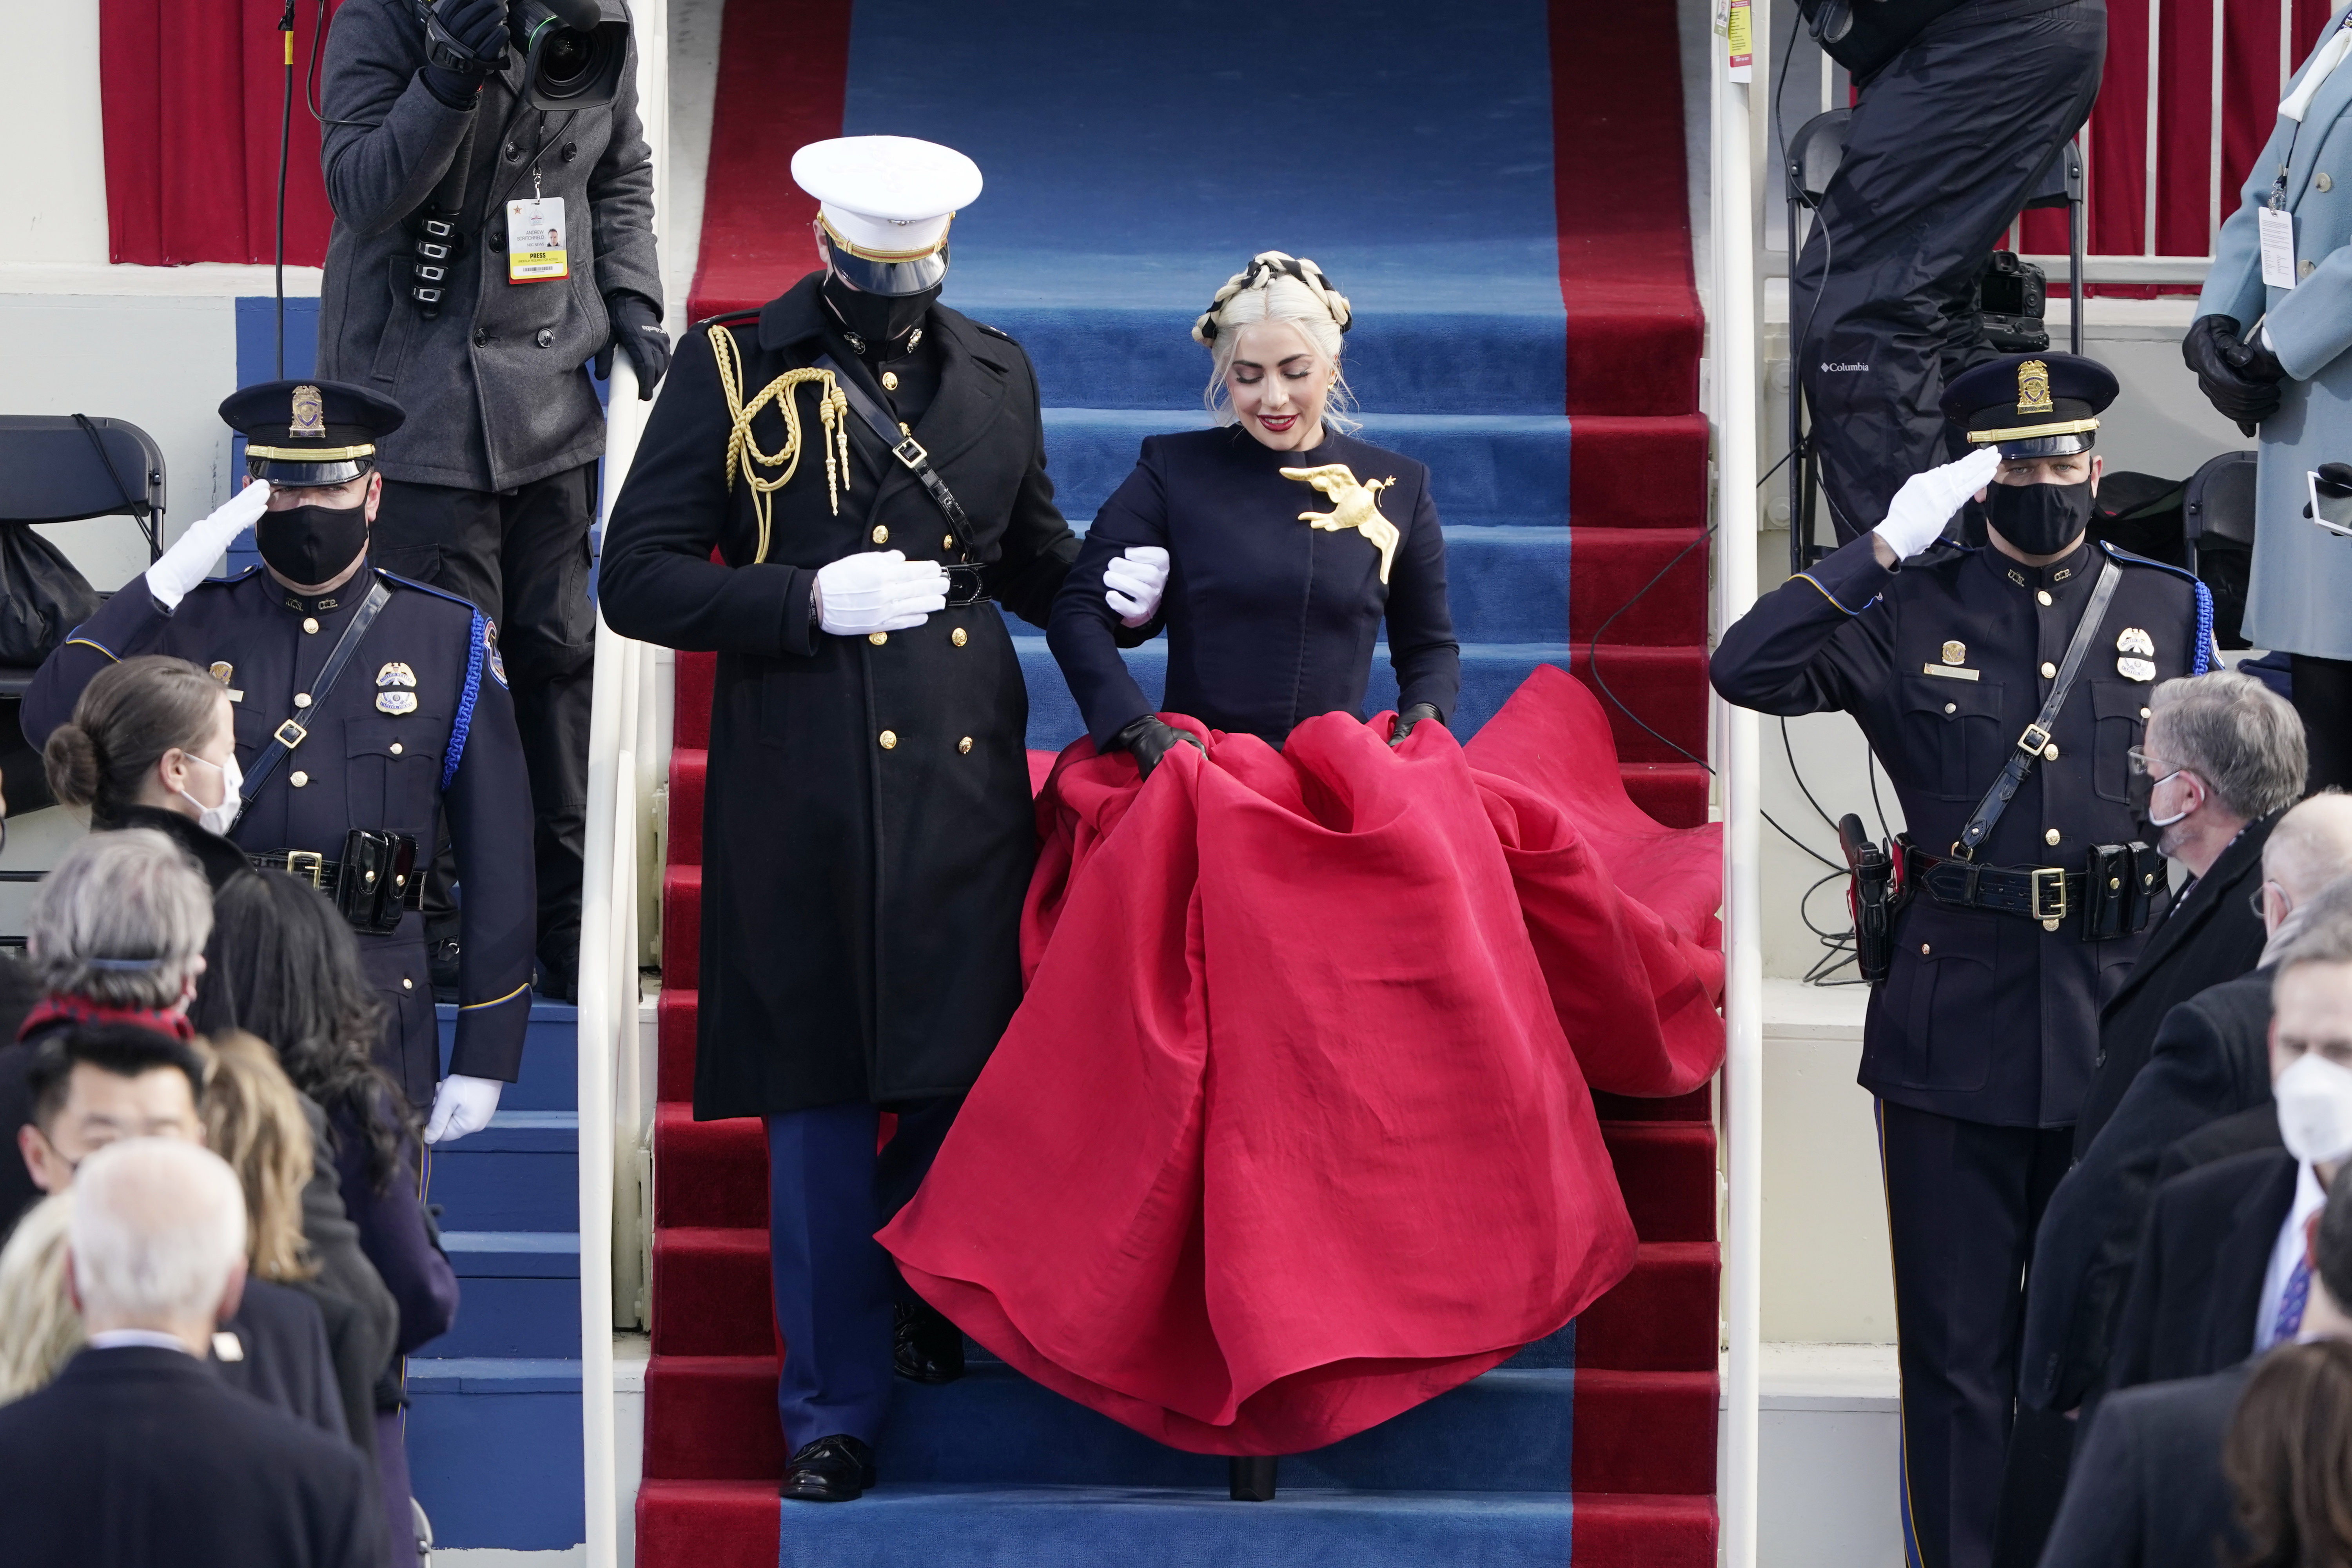 Lady Gaga arrives to sing the National Anthem during the 59th Presidential Inauguration at the U.S. Capitol in Washington, Wednesday, Jan. 20, 2021. (AP Photo/Patrick Semansky, Pool)